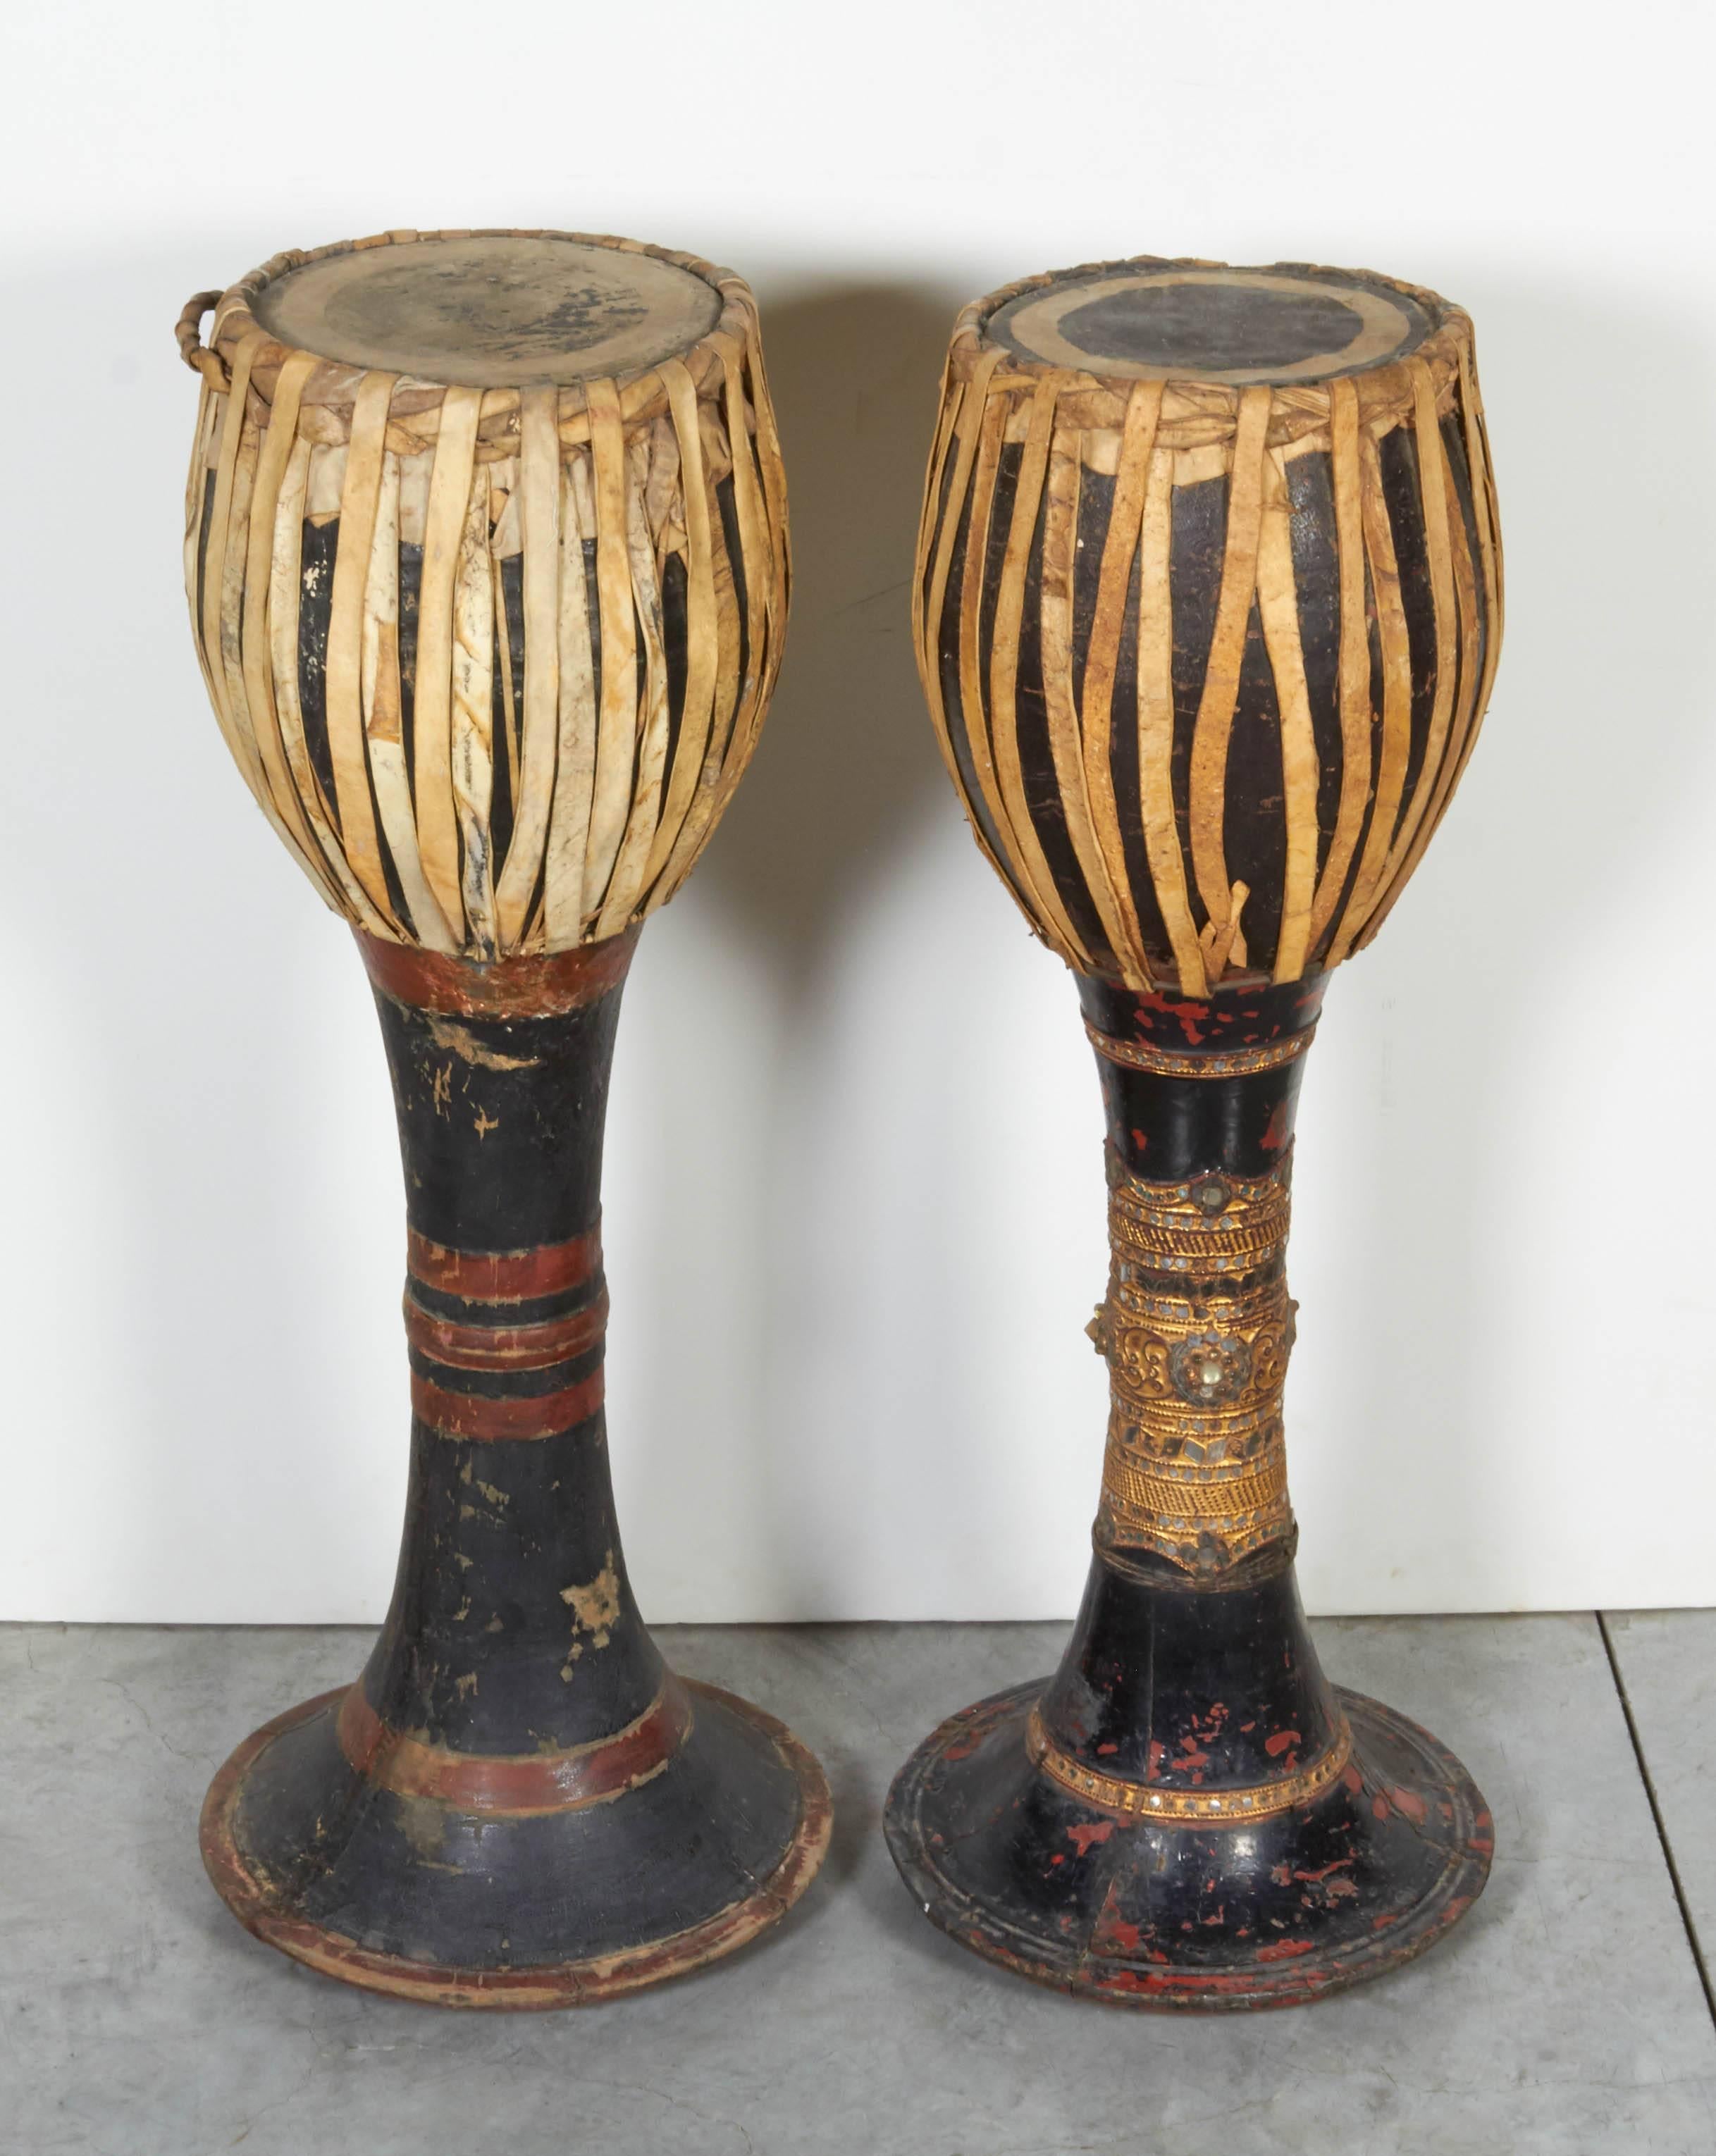 Two striking and well decorated hill tribe drums from northern Thailand. The attractive patina of these drums shows years of use in ceremonies by the hill tribes along the border between Burma and Thailand.

Only one piece available. 
RIGHT drum in